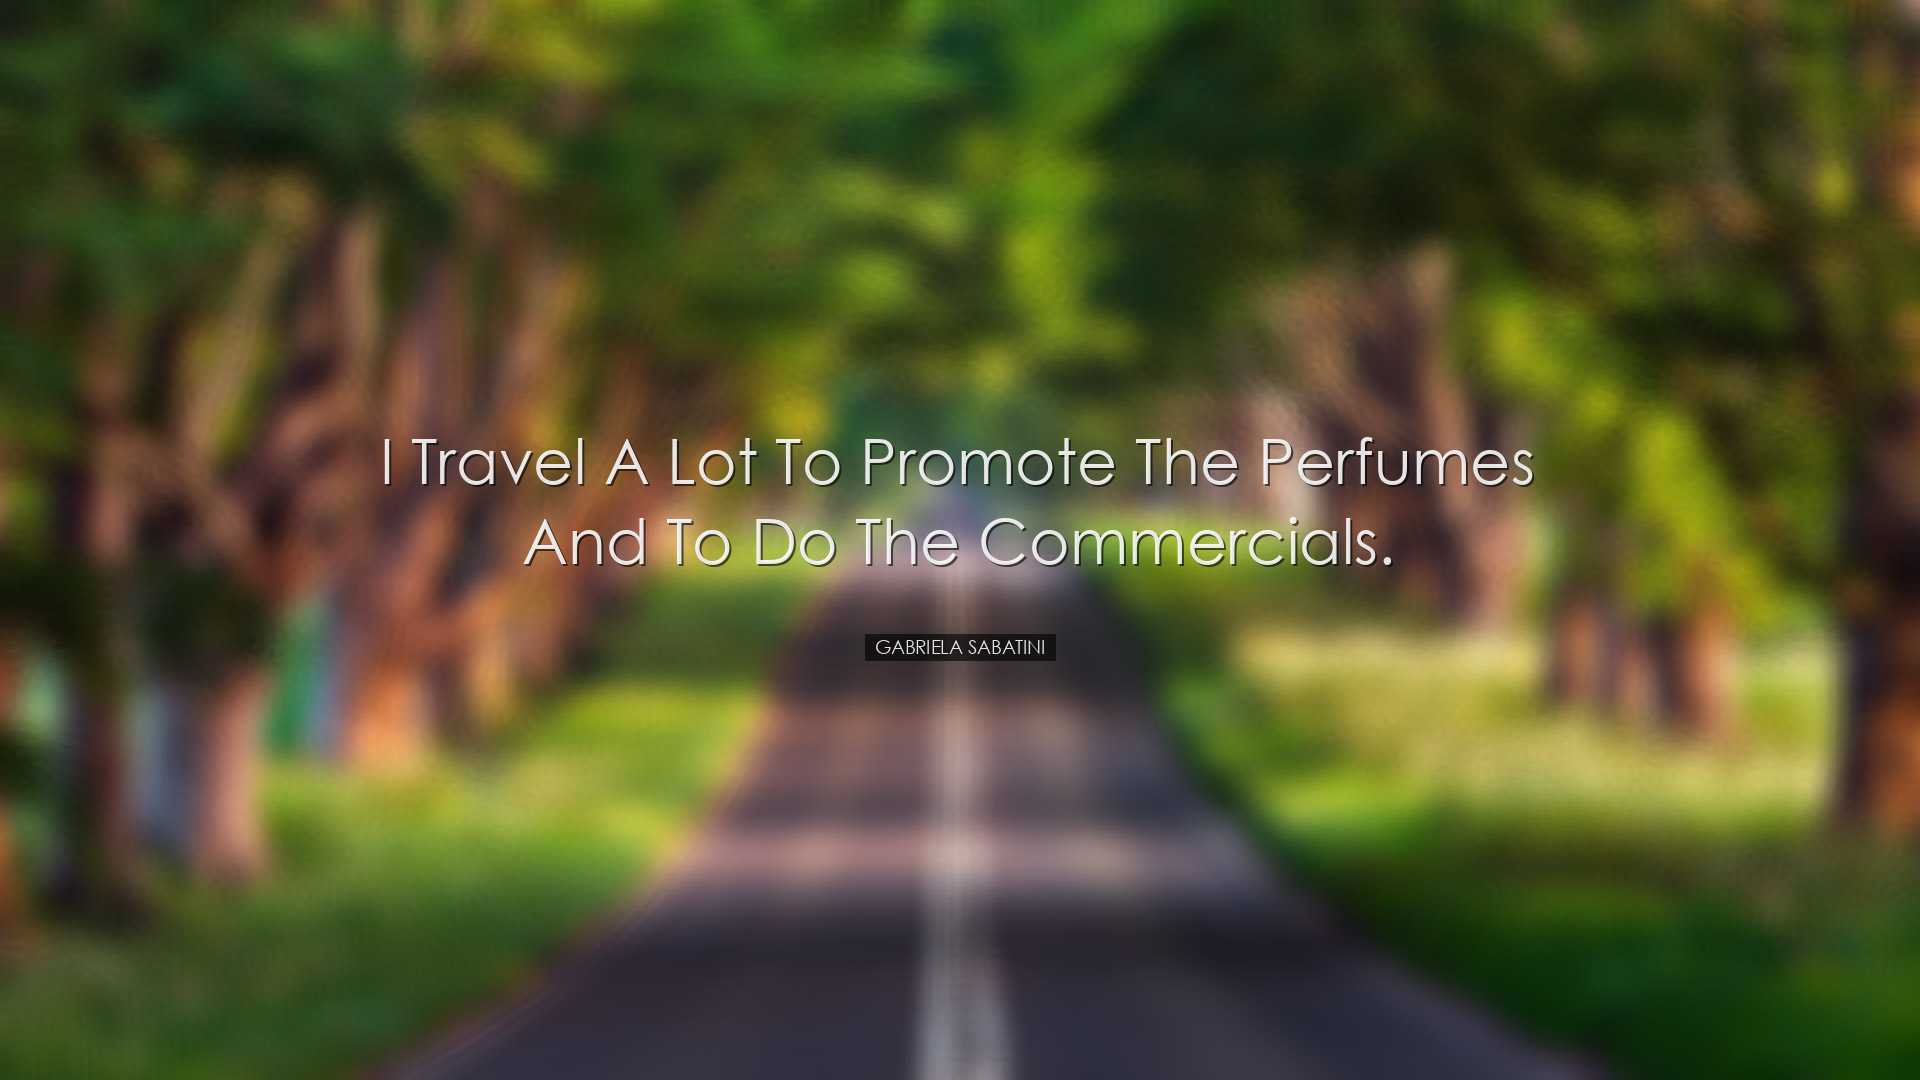 I travel a lot to promote the perfumes and to do the commercials.